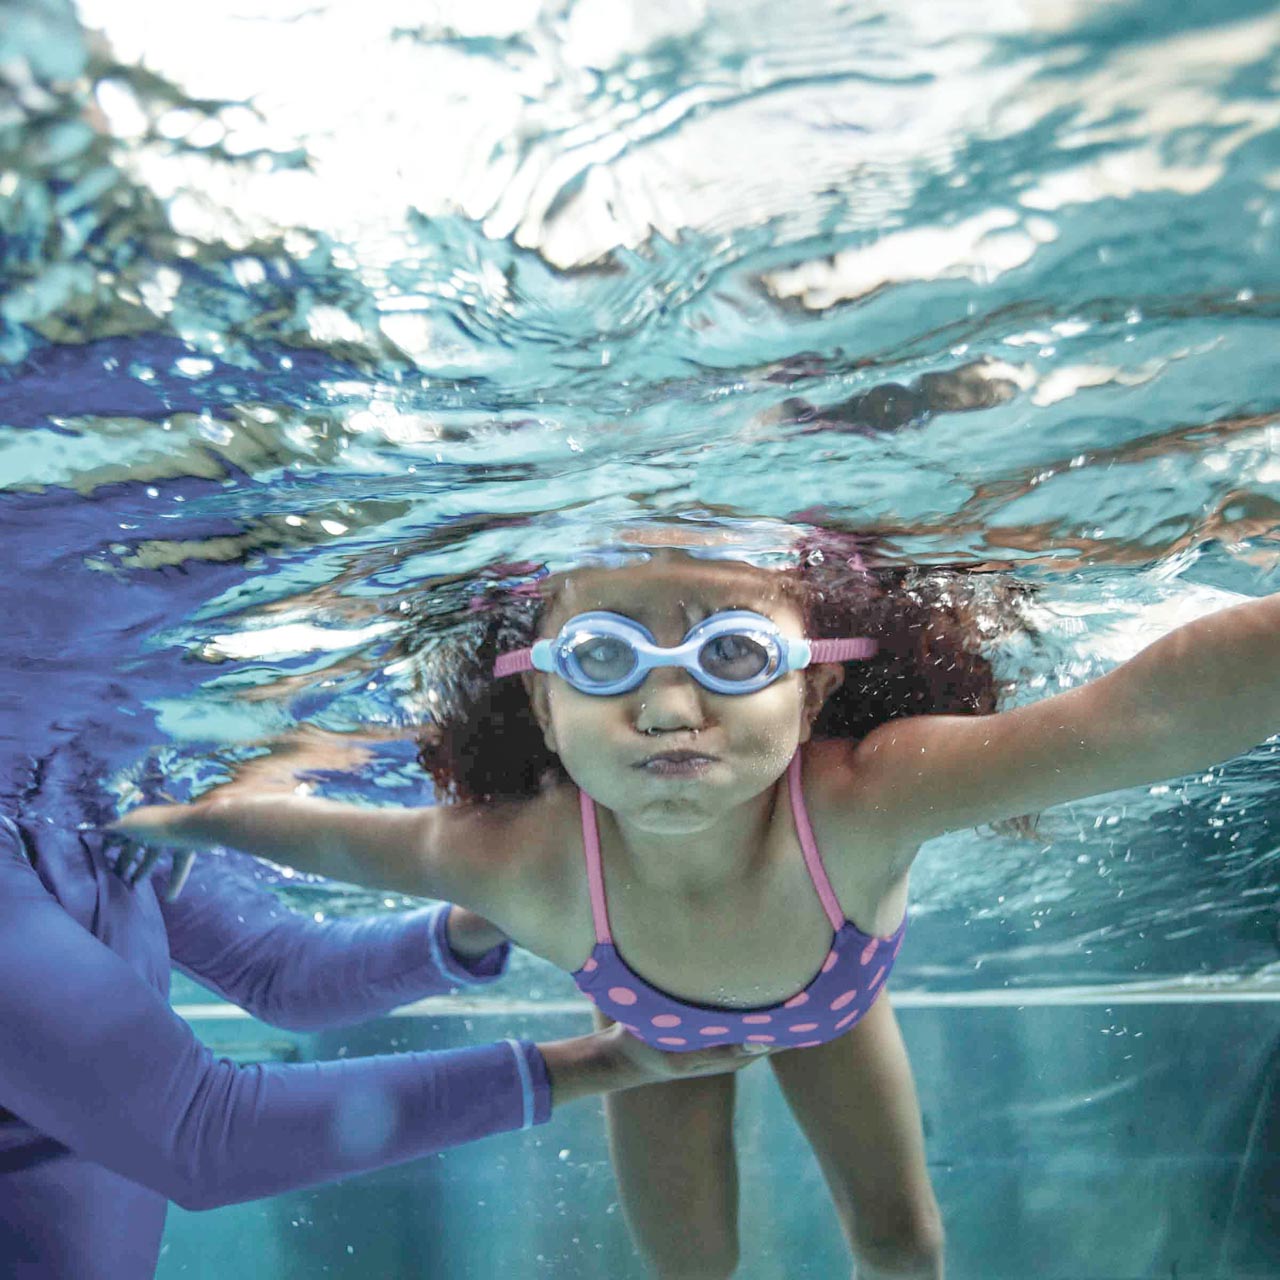 An underwater shot of a young girl puffing out her cheeks with air, learning the basics of swimming